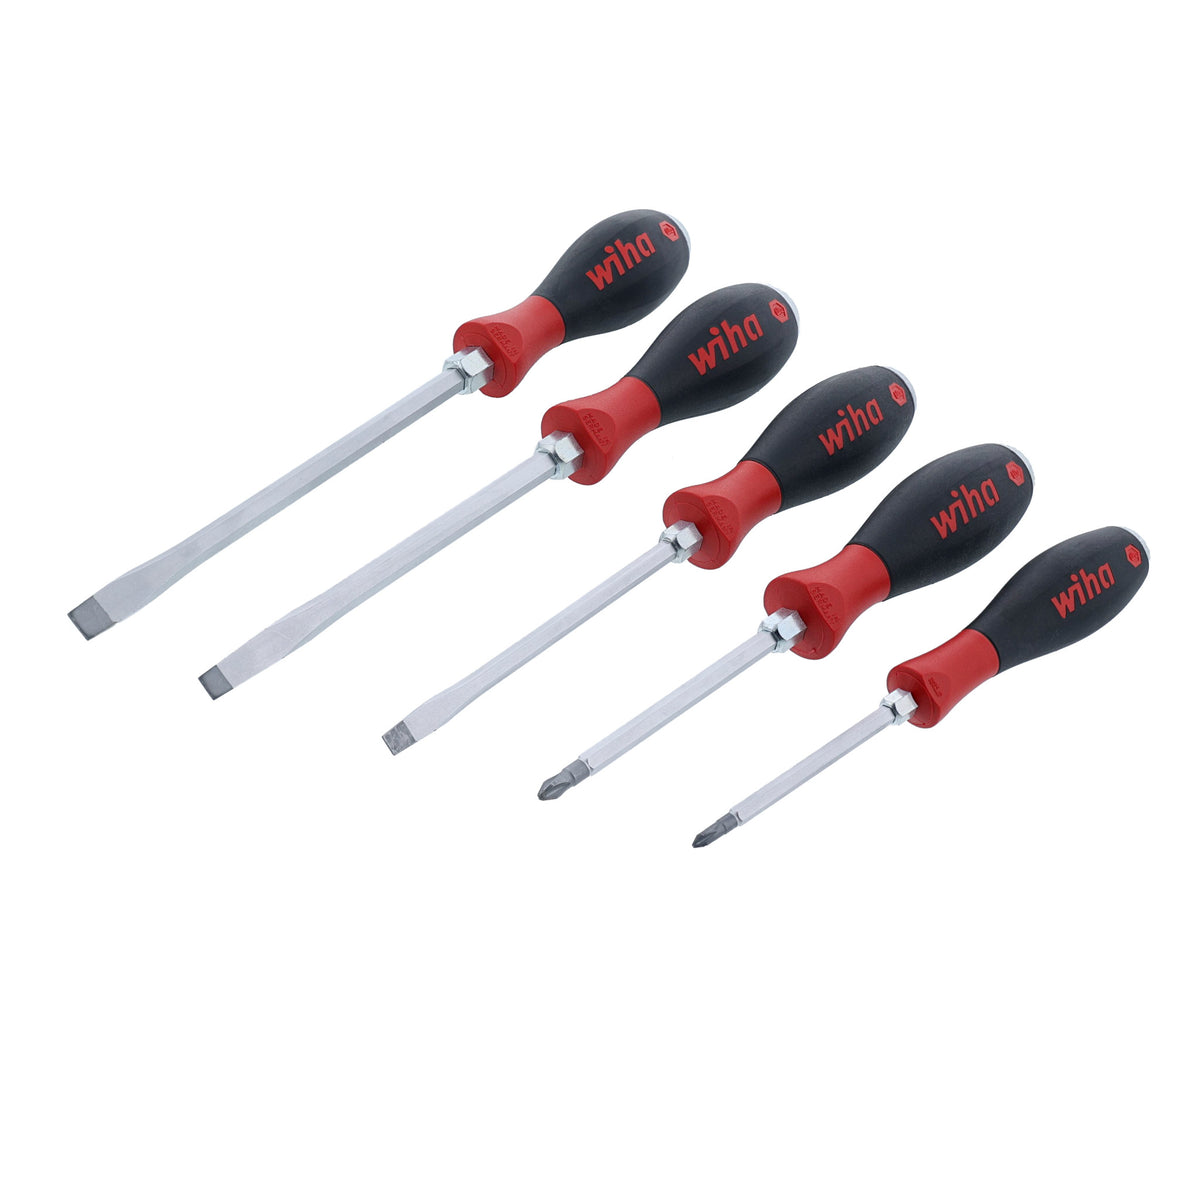 Wiha 53095 5 Piece SoftFinish X Heavy Duty Slotted and Phillips Screwdriver Set